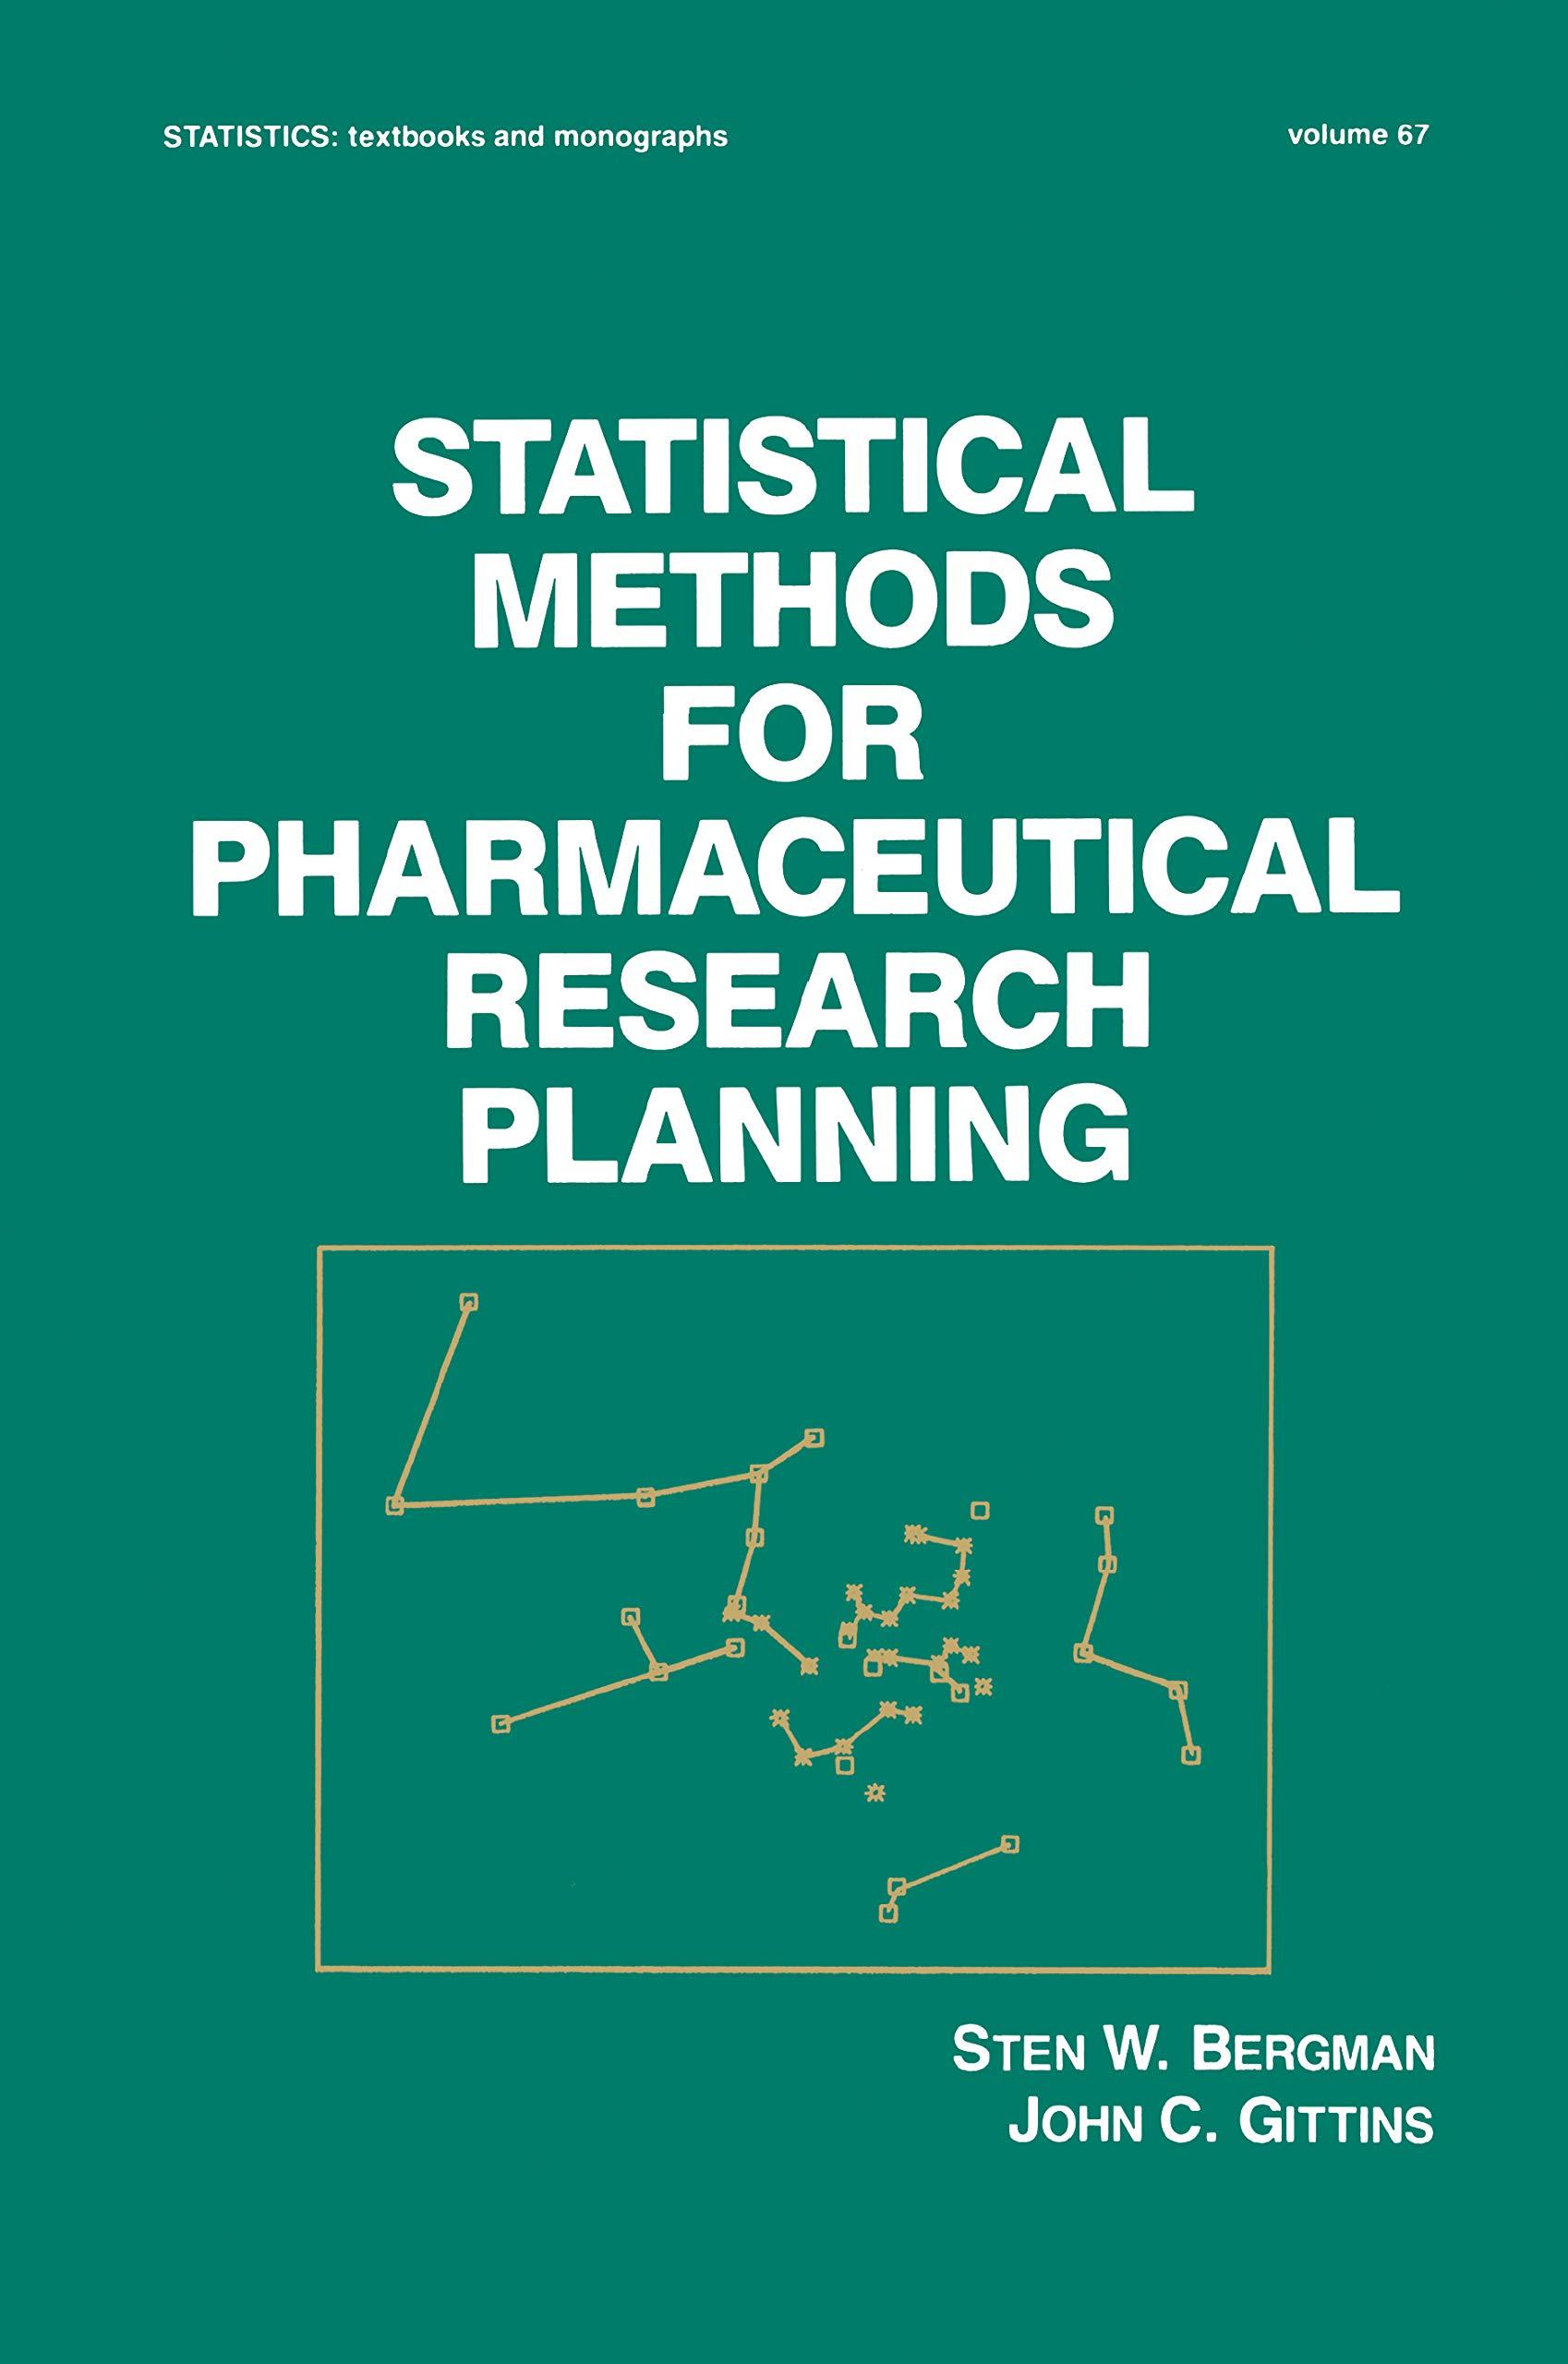 statistical methods for pharmaceutical research planning 1st edition s. w. bergman 082477146x, 9780824771461